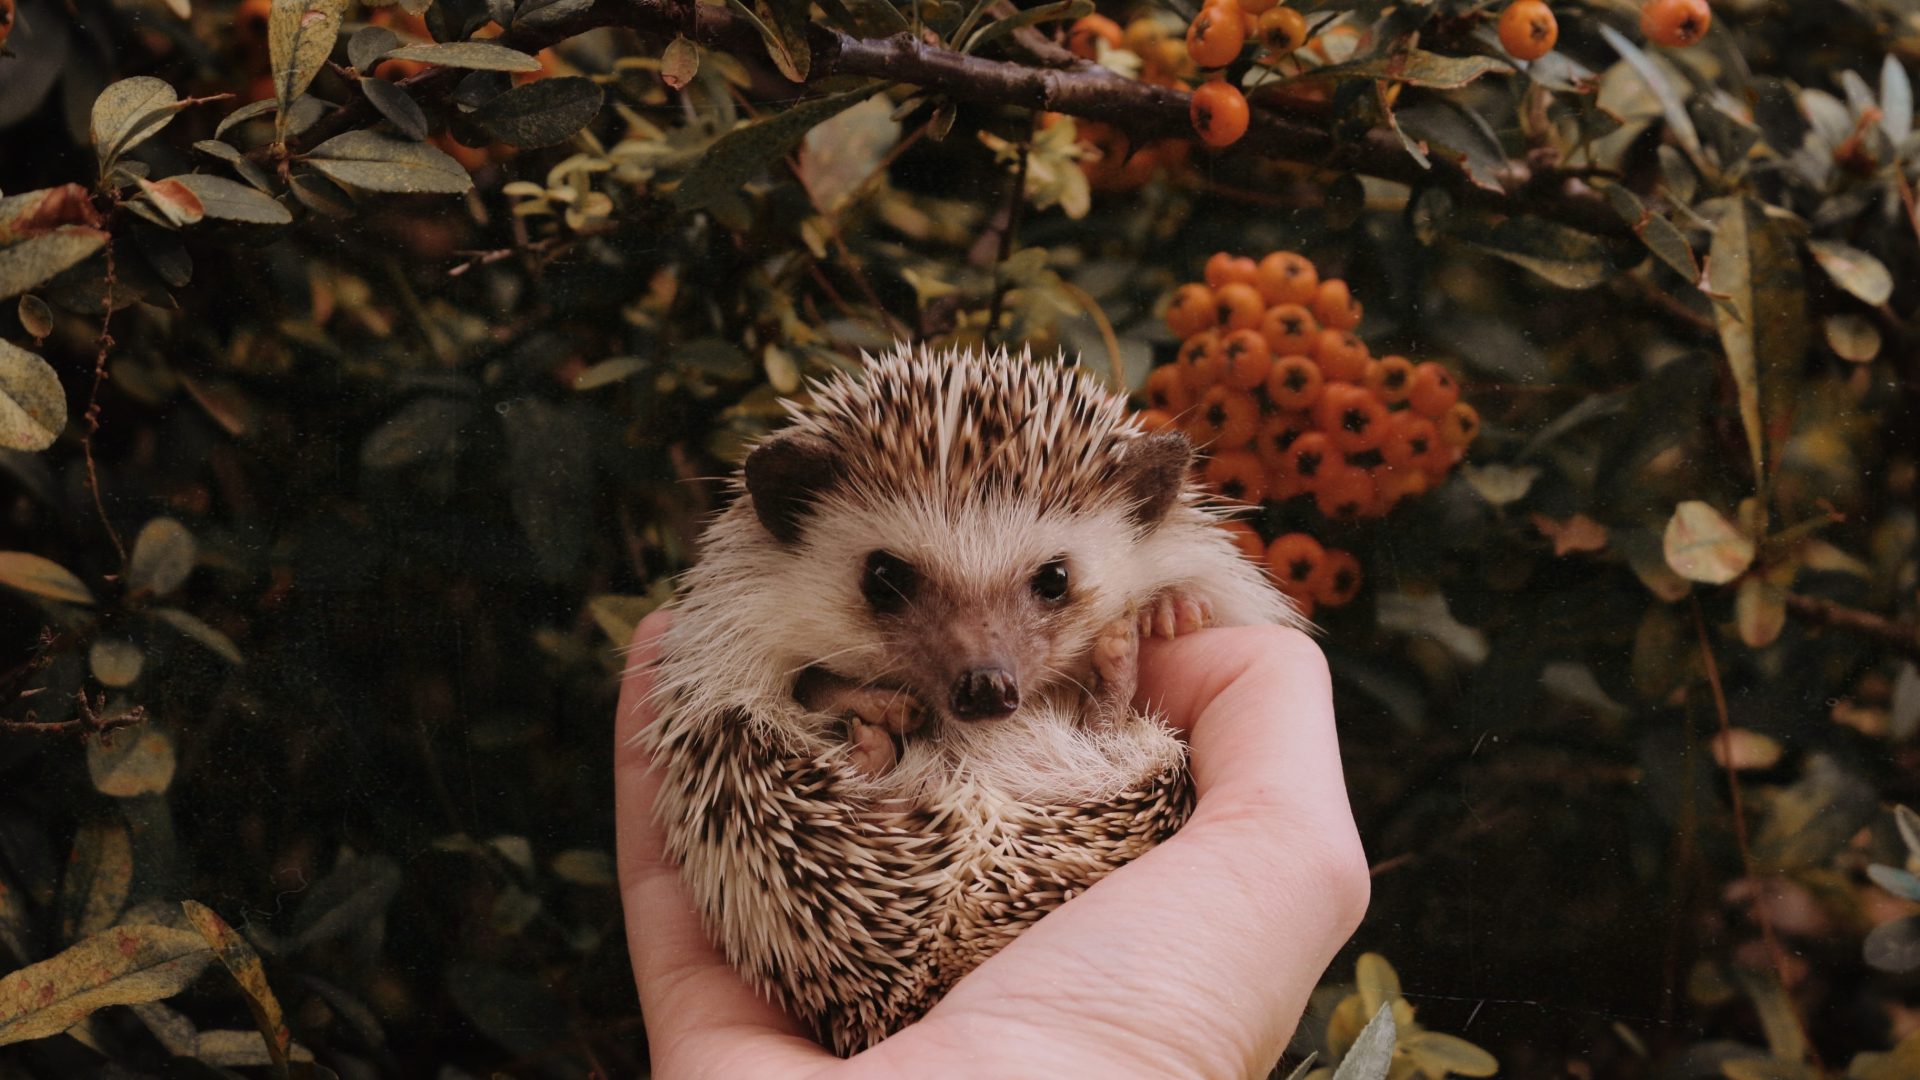 One benefit of citizen science? Finding an elderly hedgehog called Thorvald